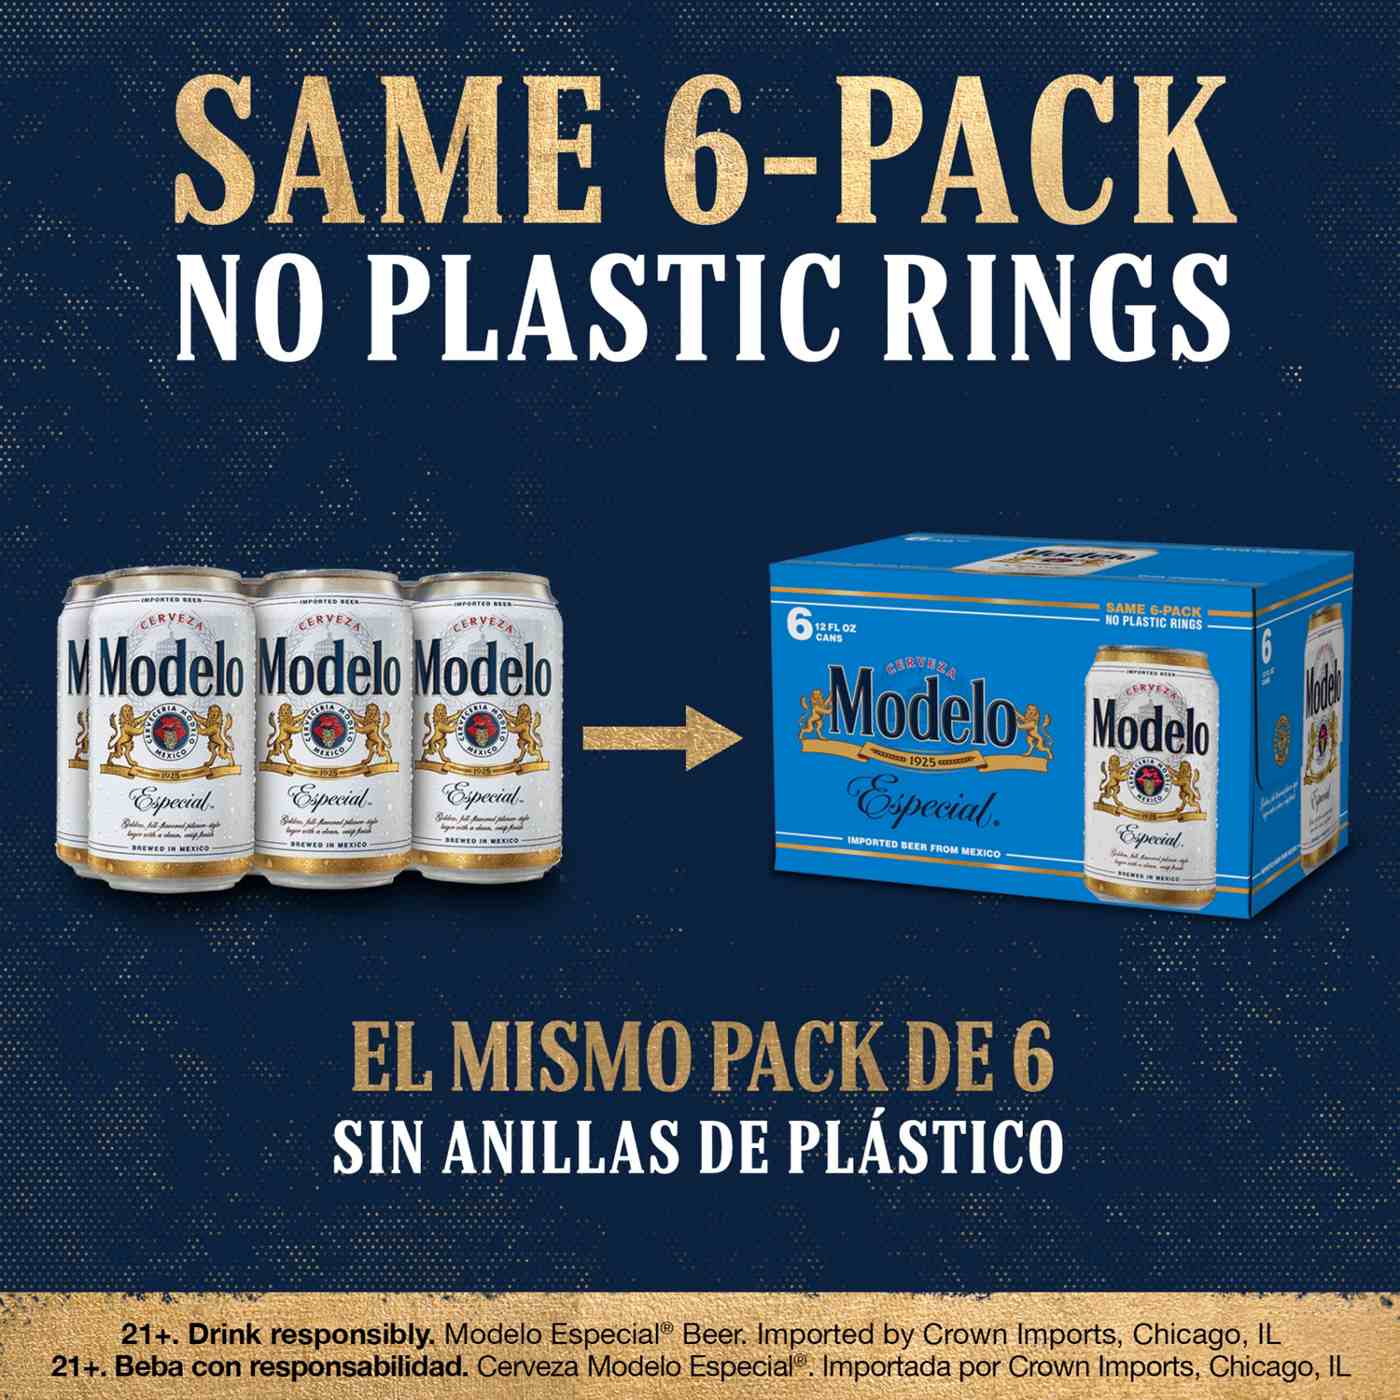 Modelo Especial Mexican Lager Import Beer 12 oz Cans, 6 pk; image 8 of 11